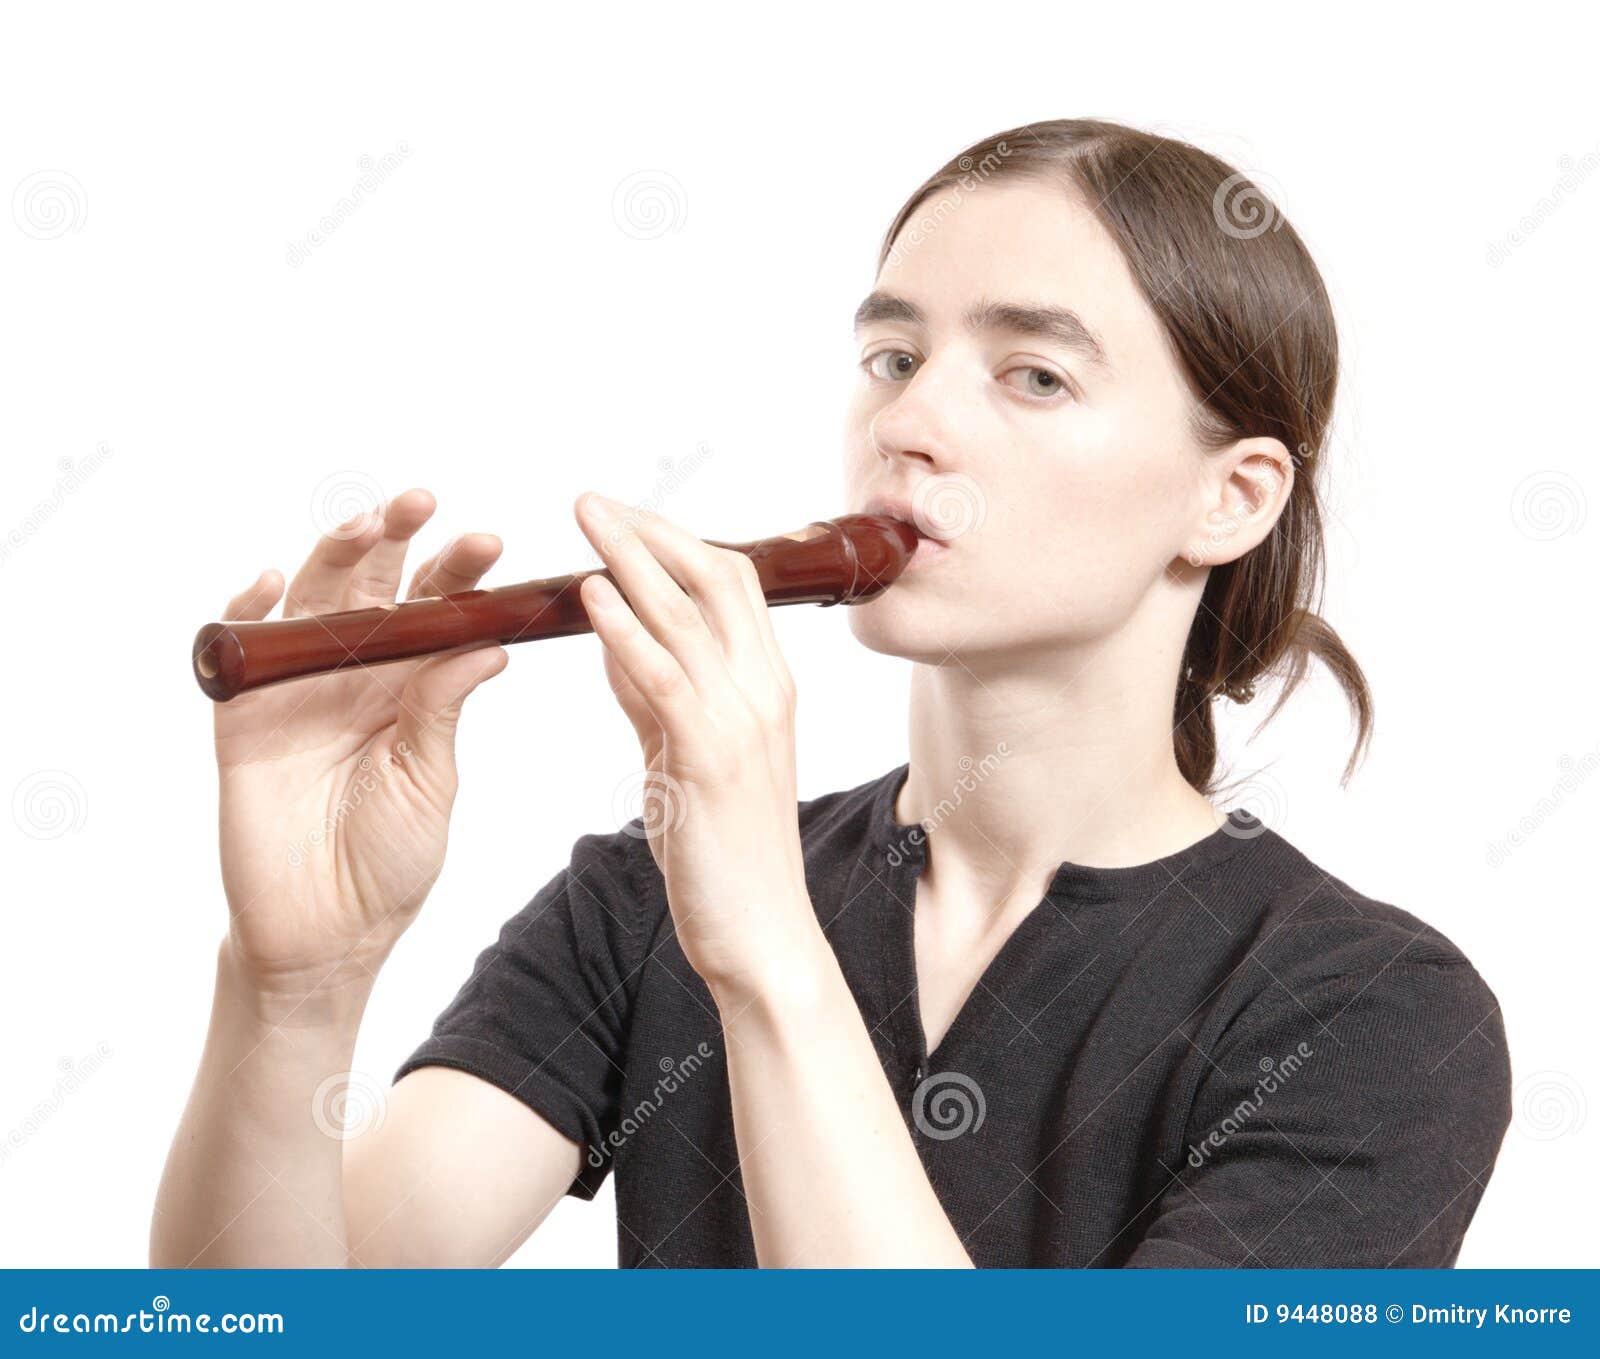 Playing recorder stock photo. Image of instrument, complexion - 9448088